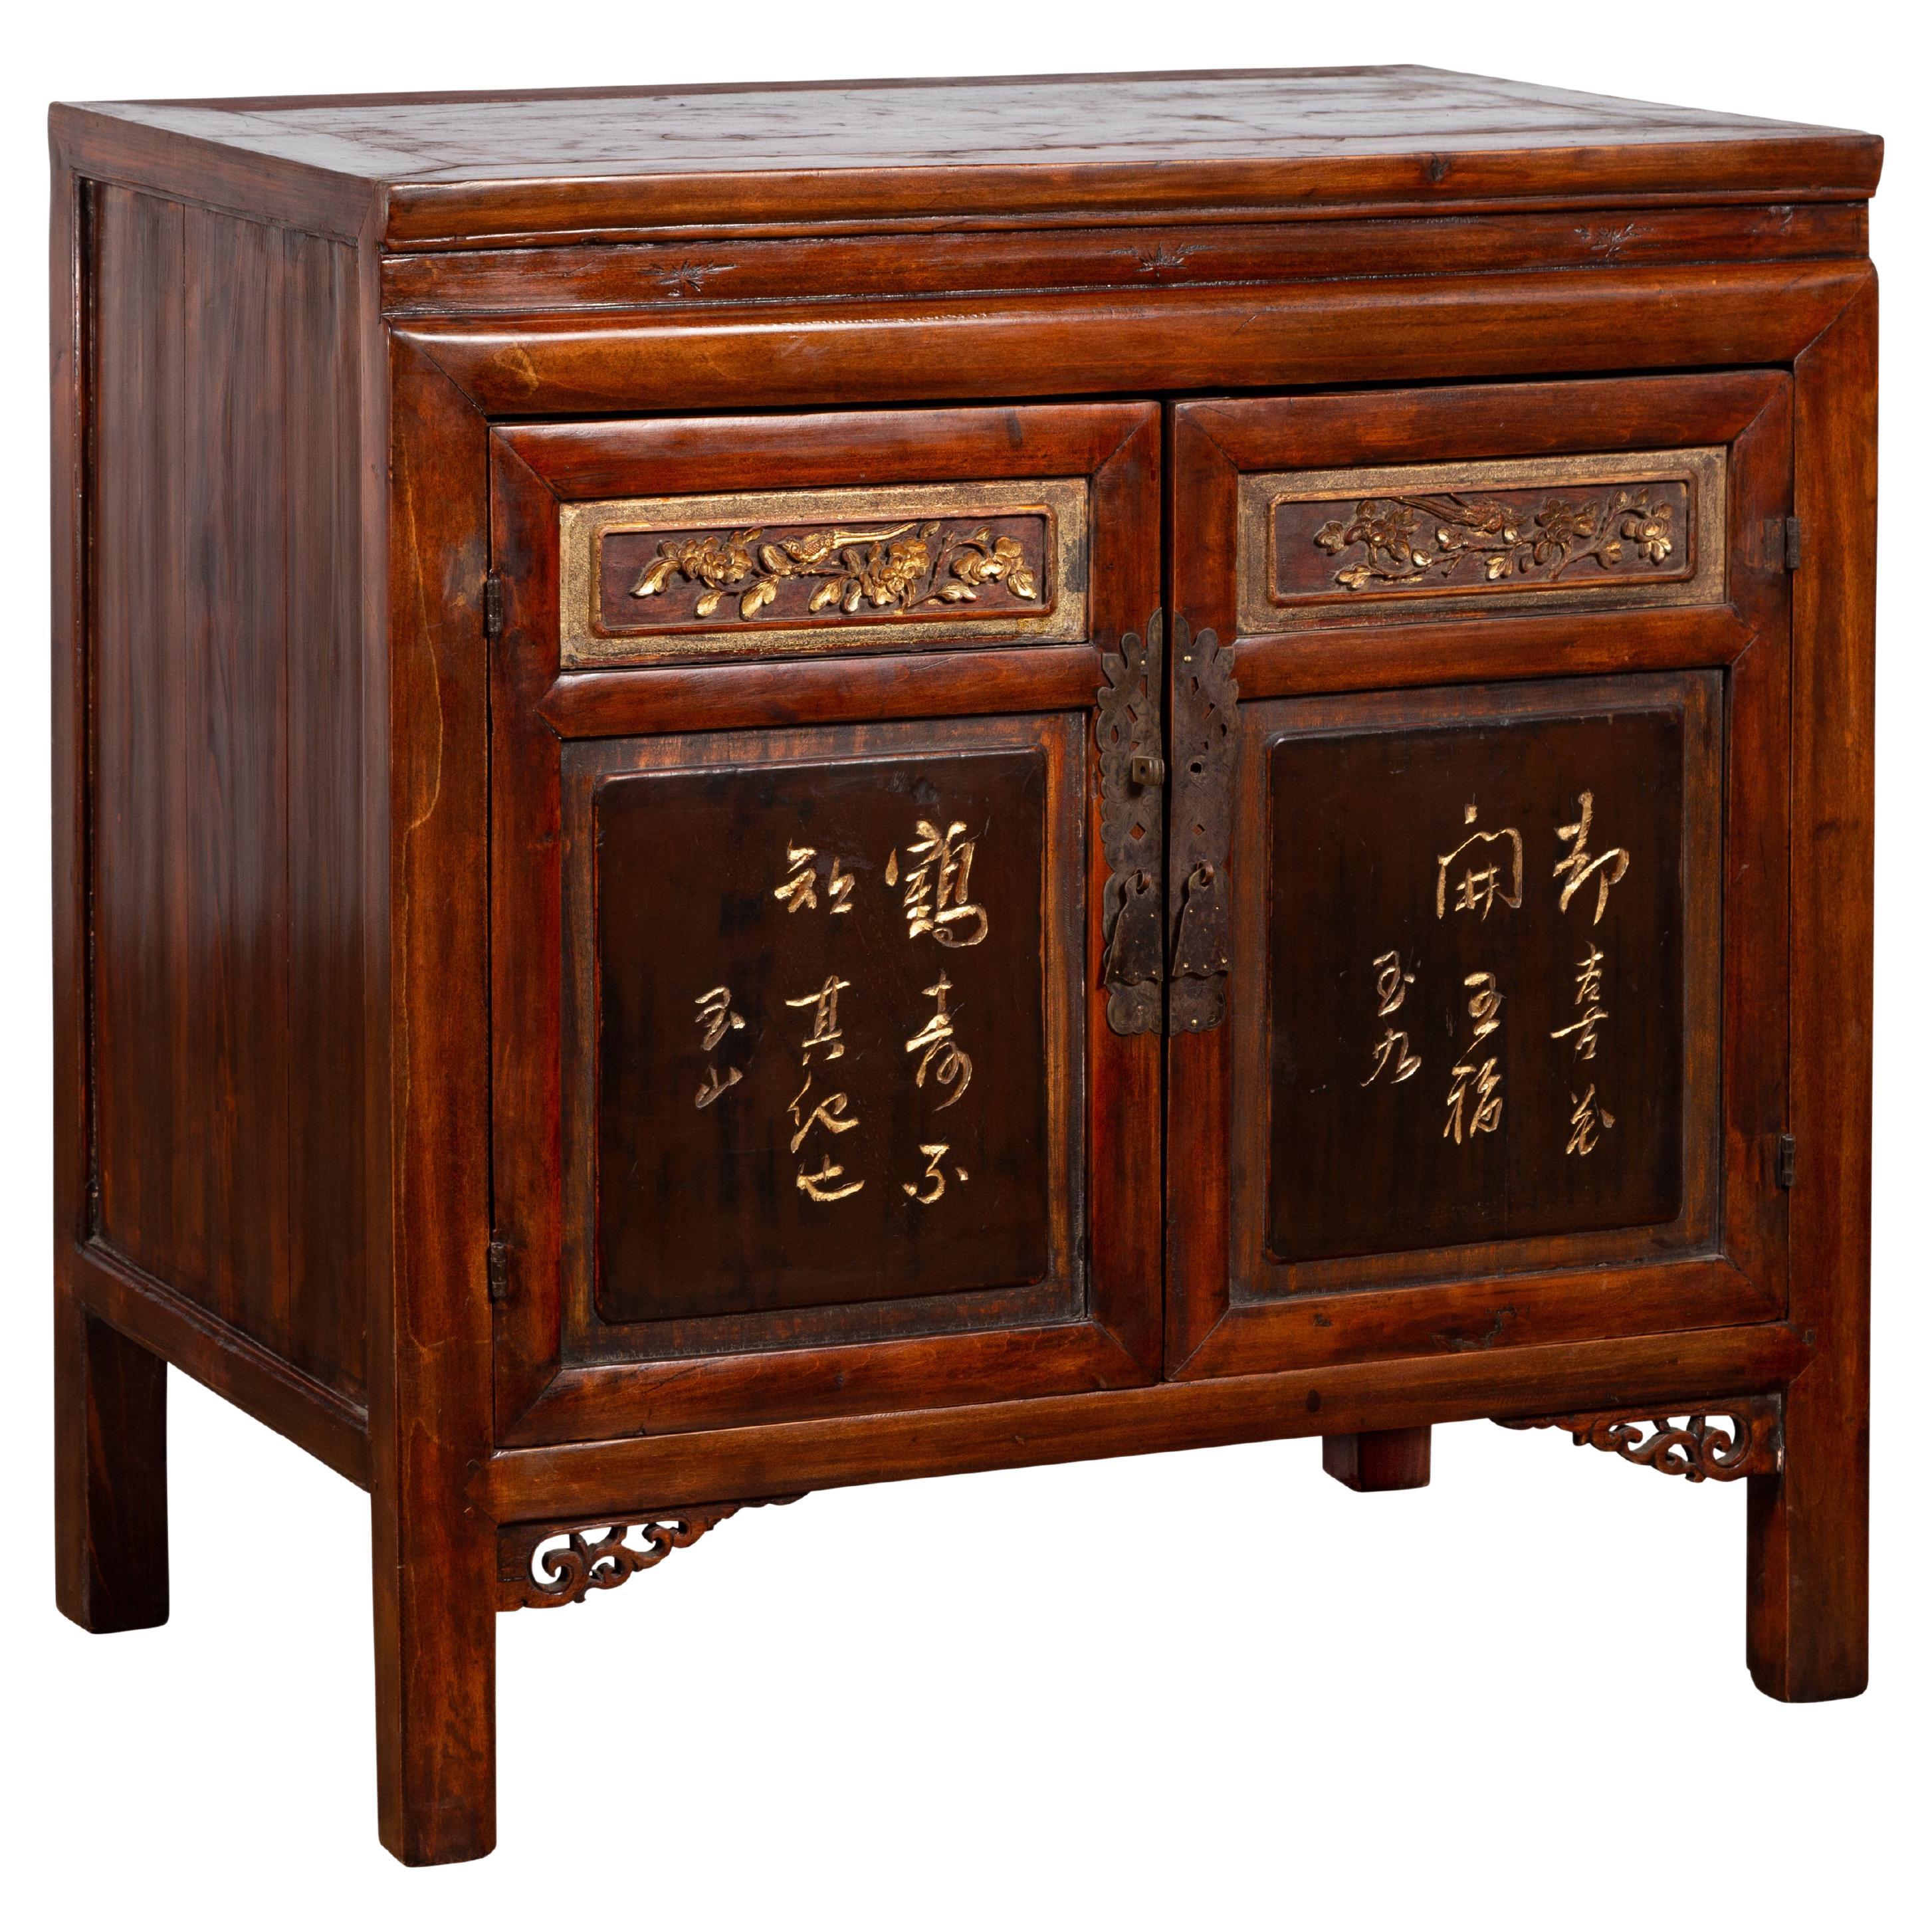 Chinese Early 20th Century Cabinet with Carved Gilded Flowers and Calligraphy